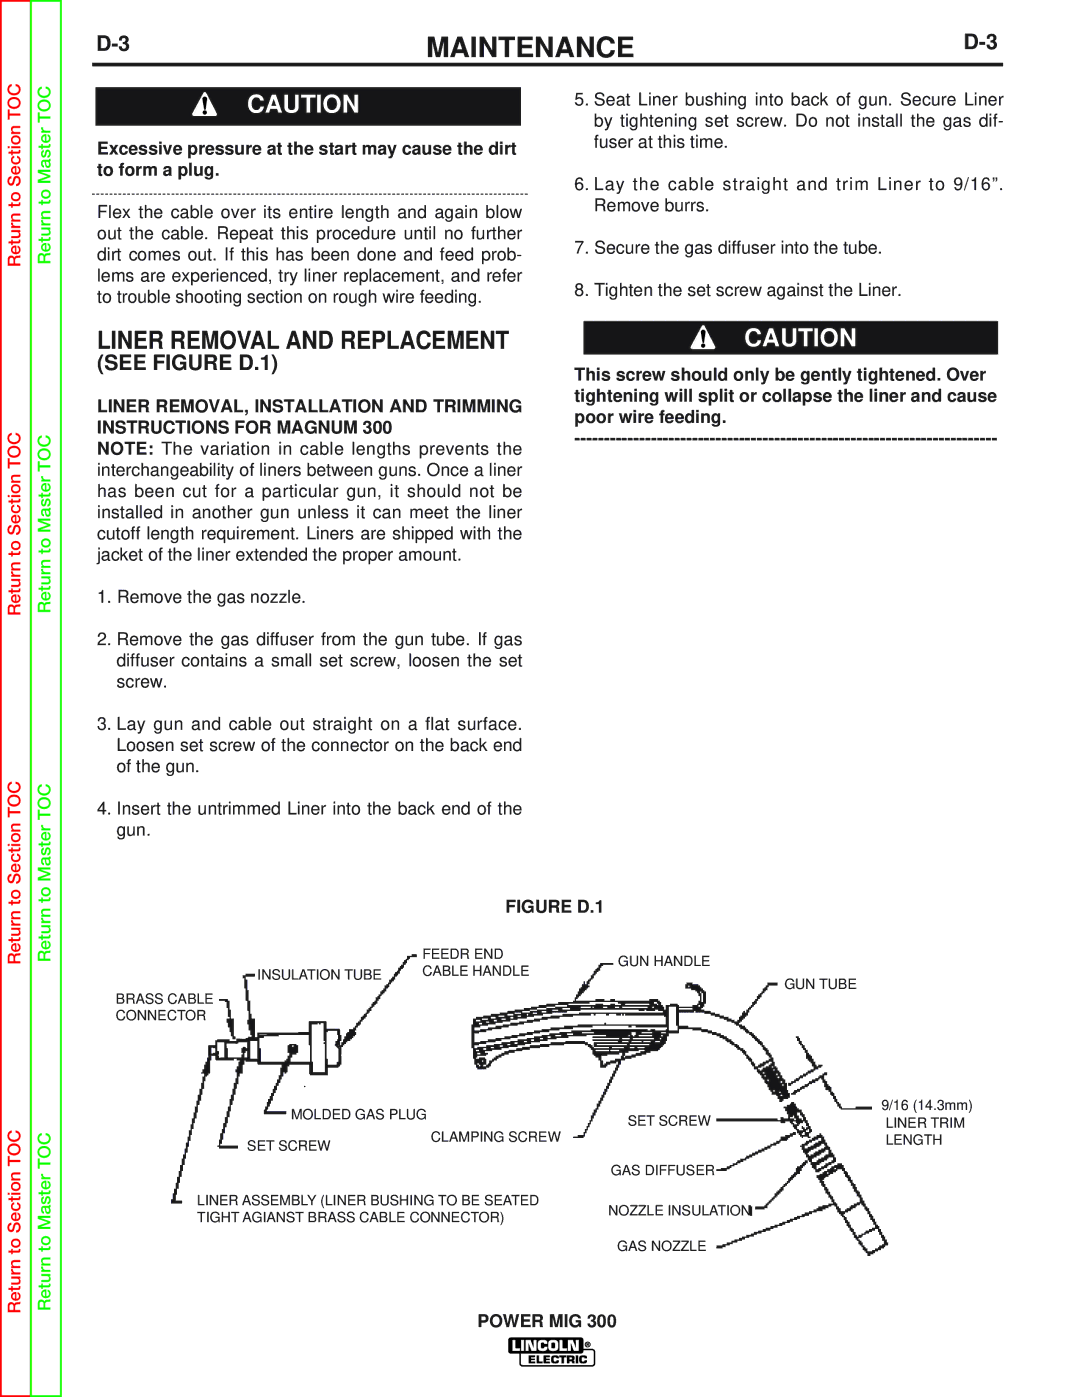 Lincoln Electric SVM160-B service manual Liner Removal and Replacement, See Figure D.1 